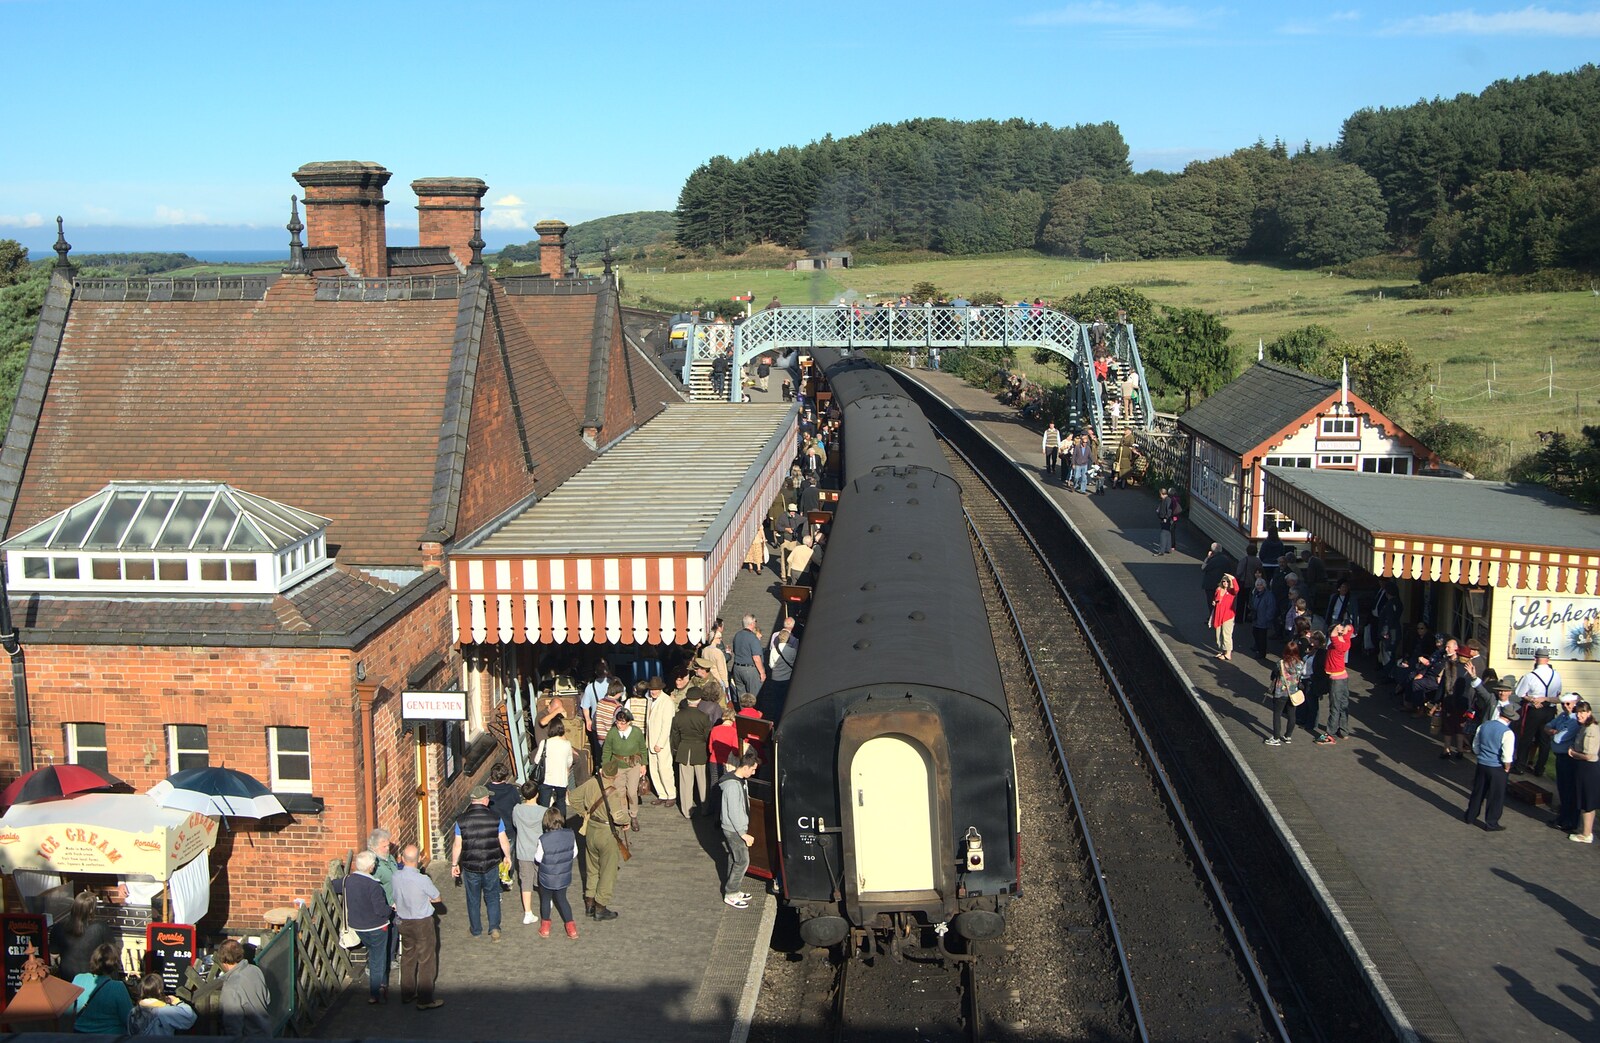 View from the bridge of Weybourne Station from The 1940s Steam Train Weekend, Holt, Norfolk - 18th September 2011